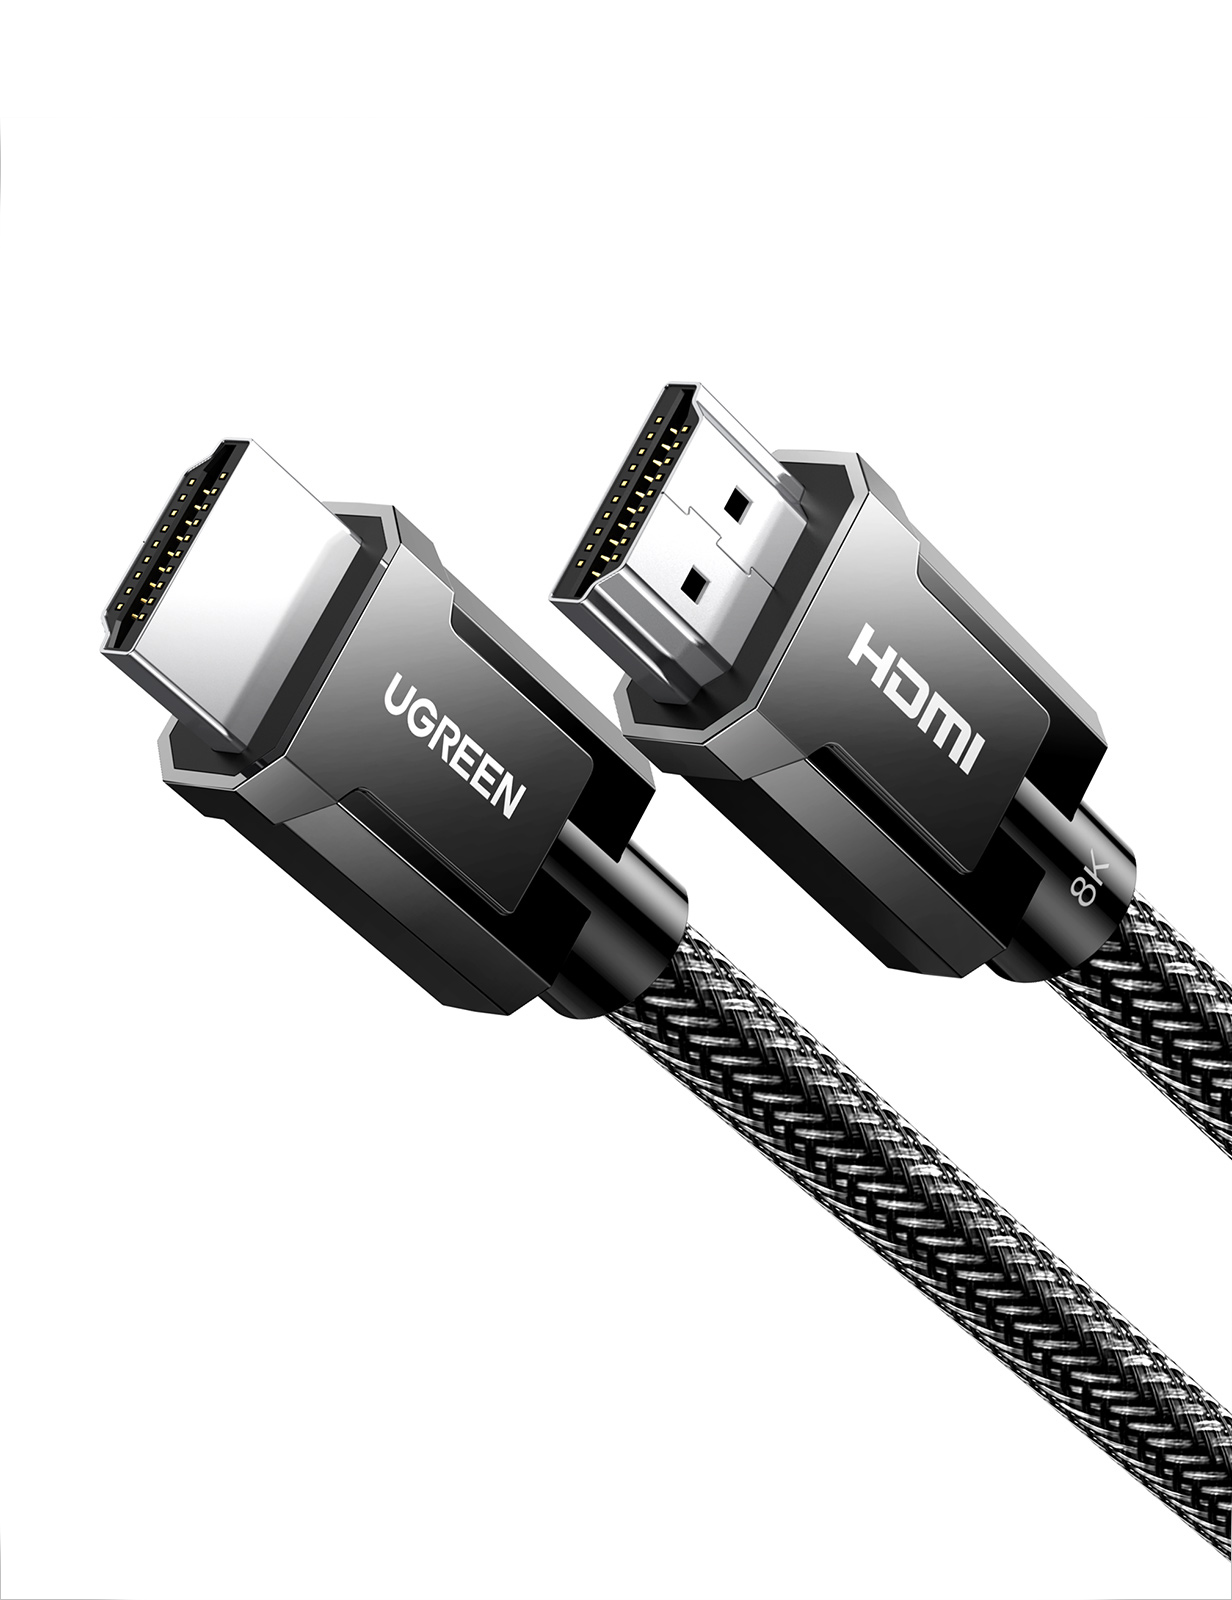 UGREEN HDMI M/M Round Cable Zinc Alloy Shell Braided 3m (Gray)